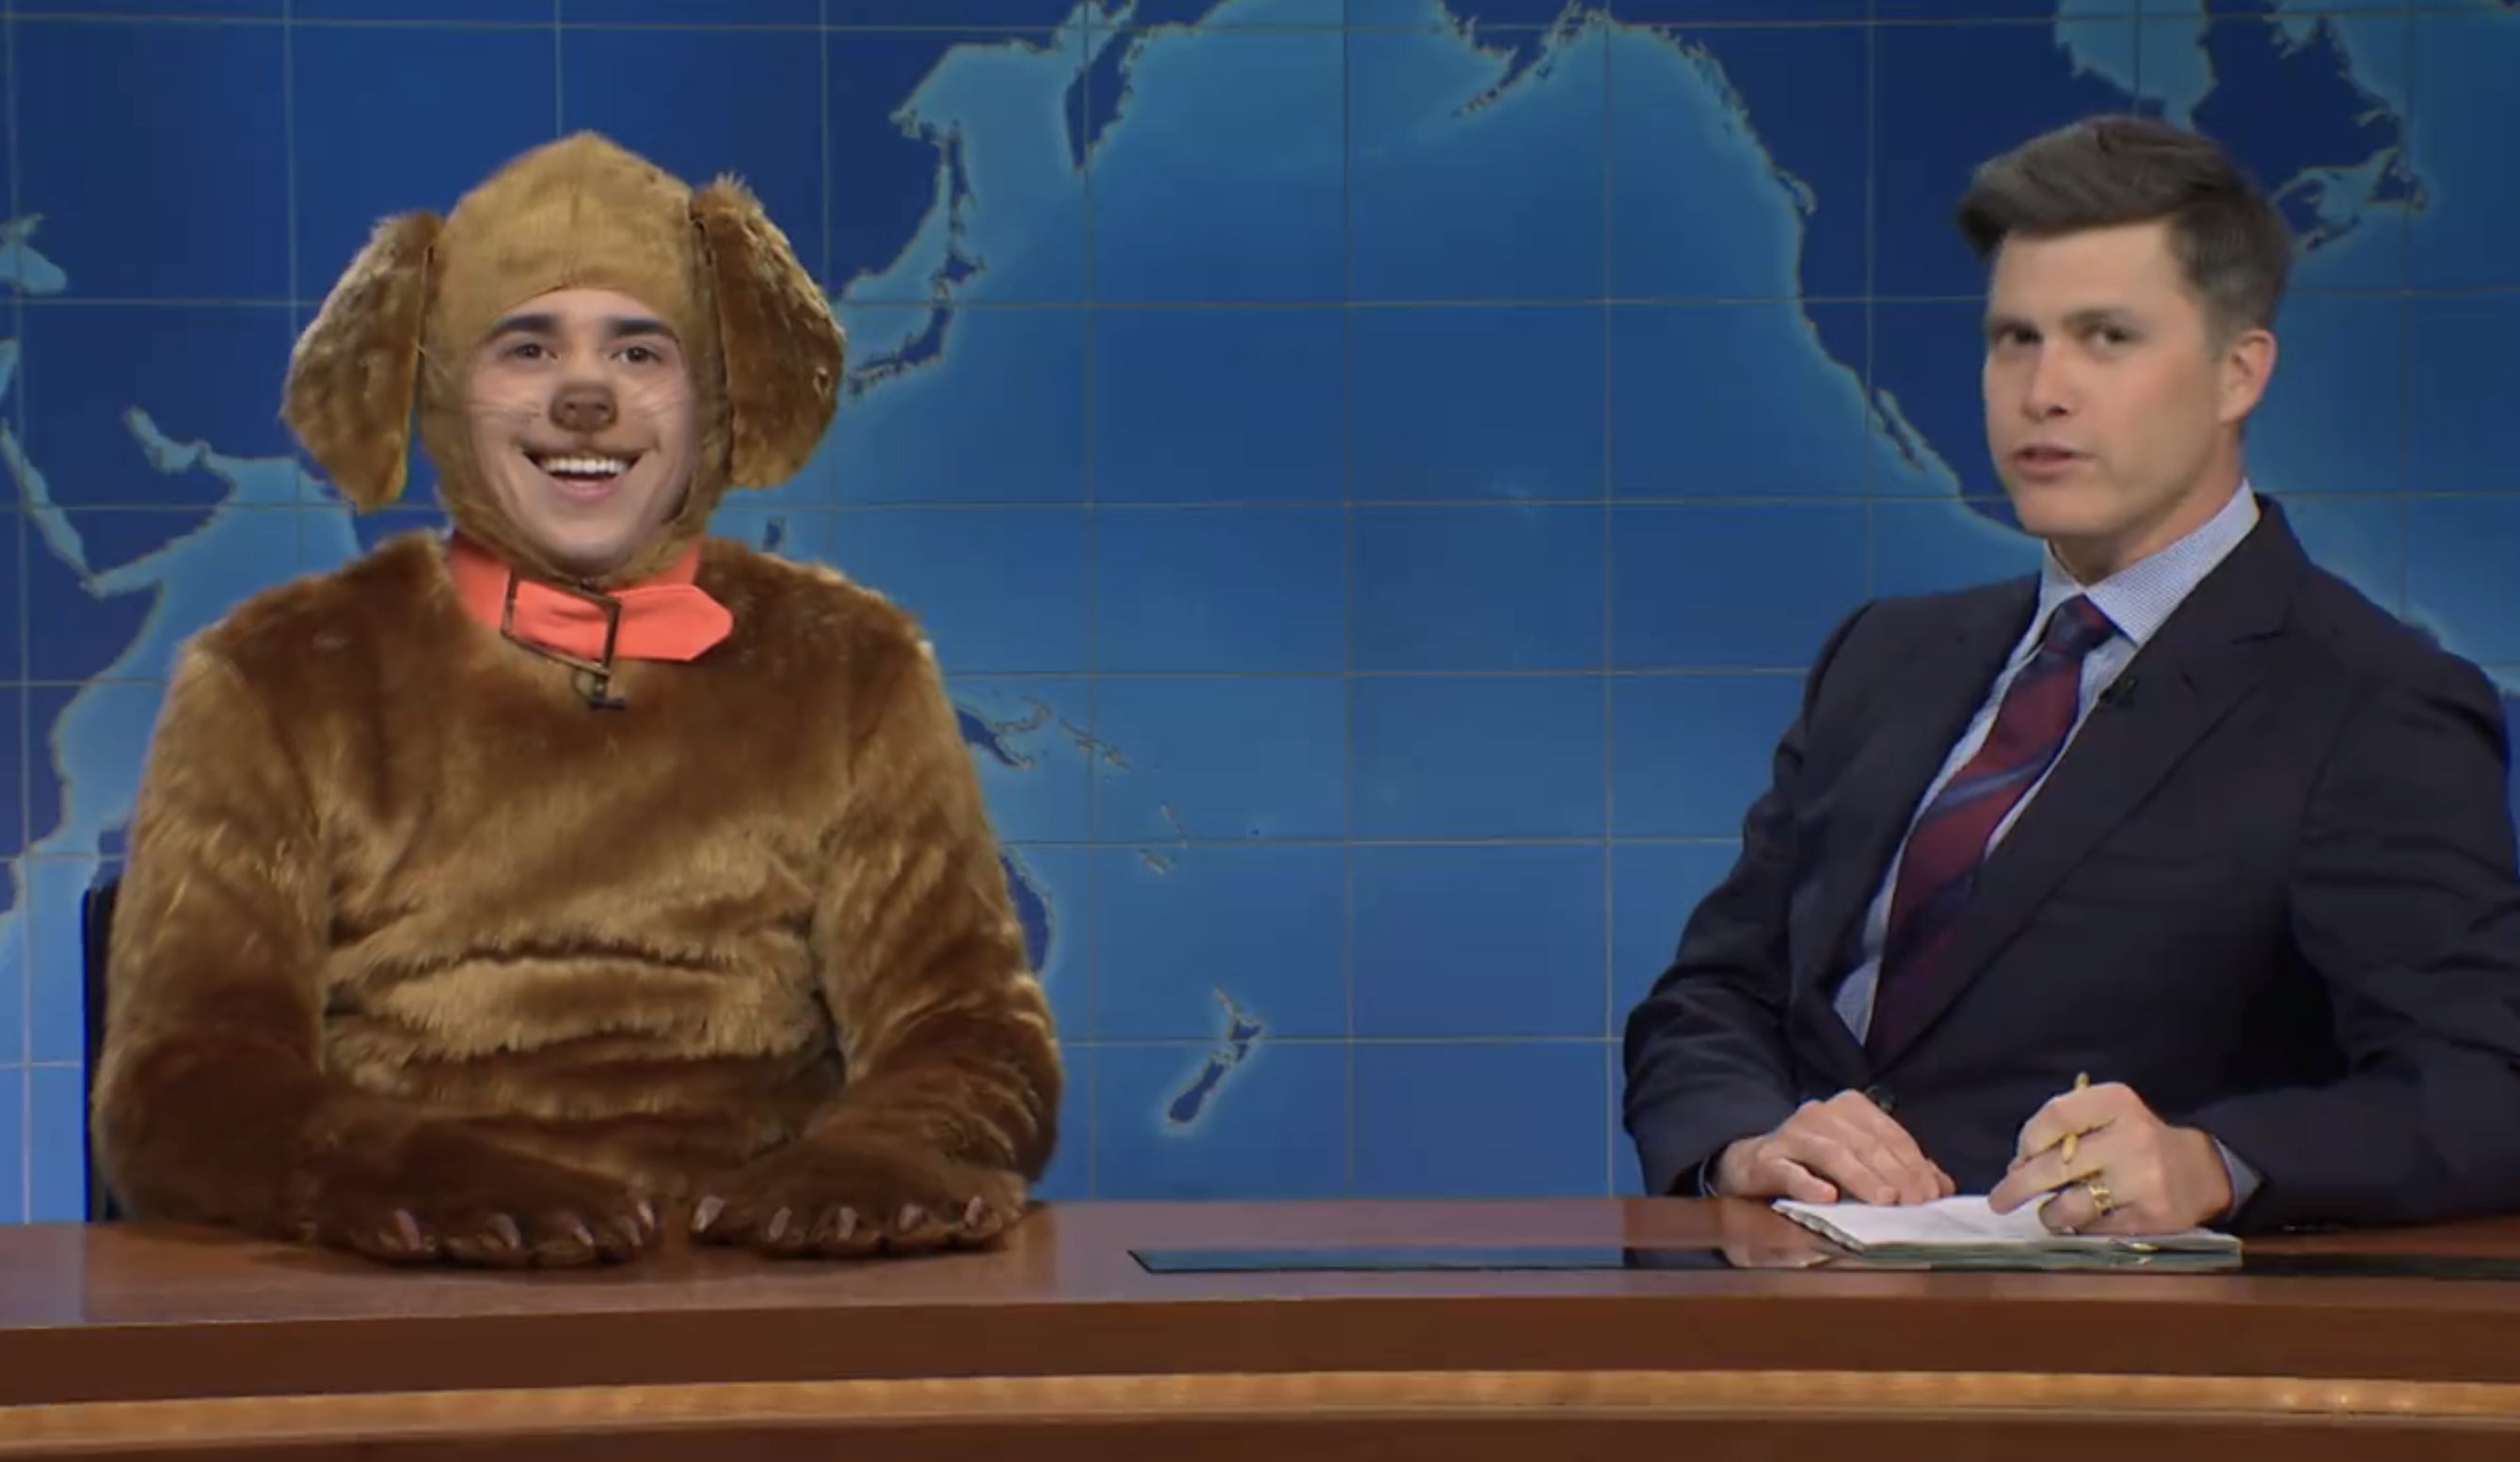 Two performers on SNL; one dressed as a dog with ears and collar, another in a suit at a news desk